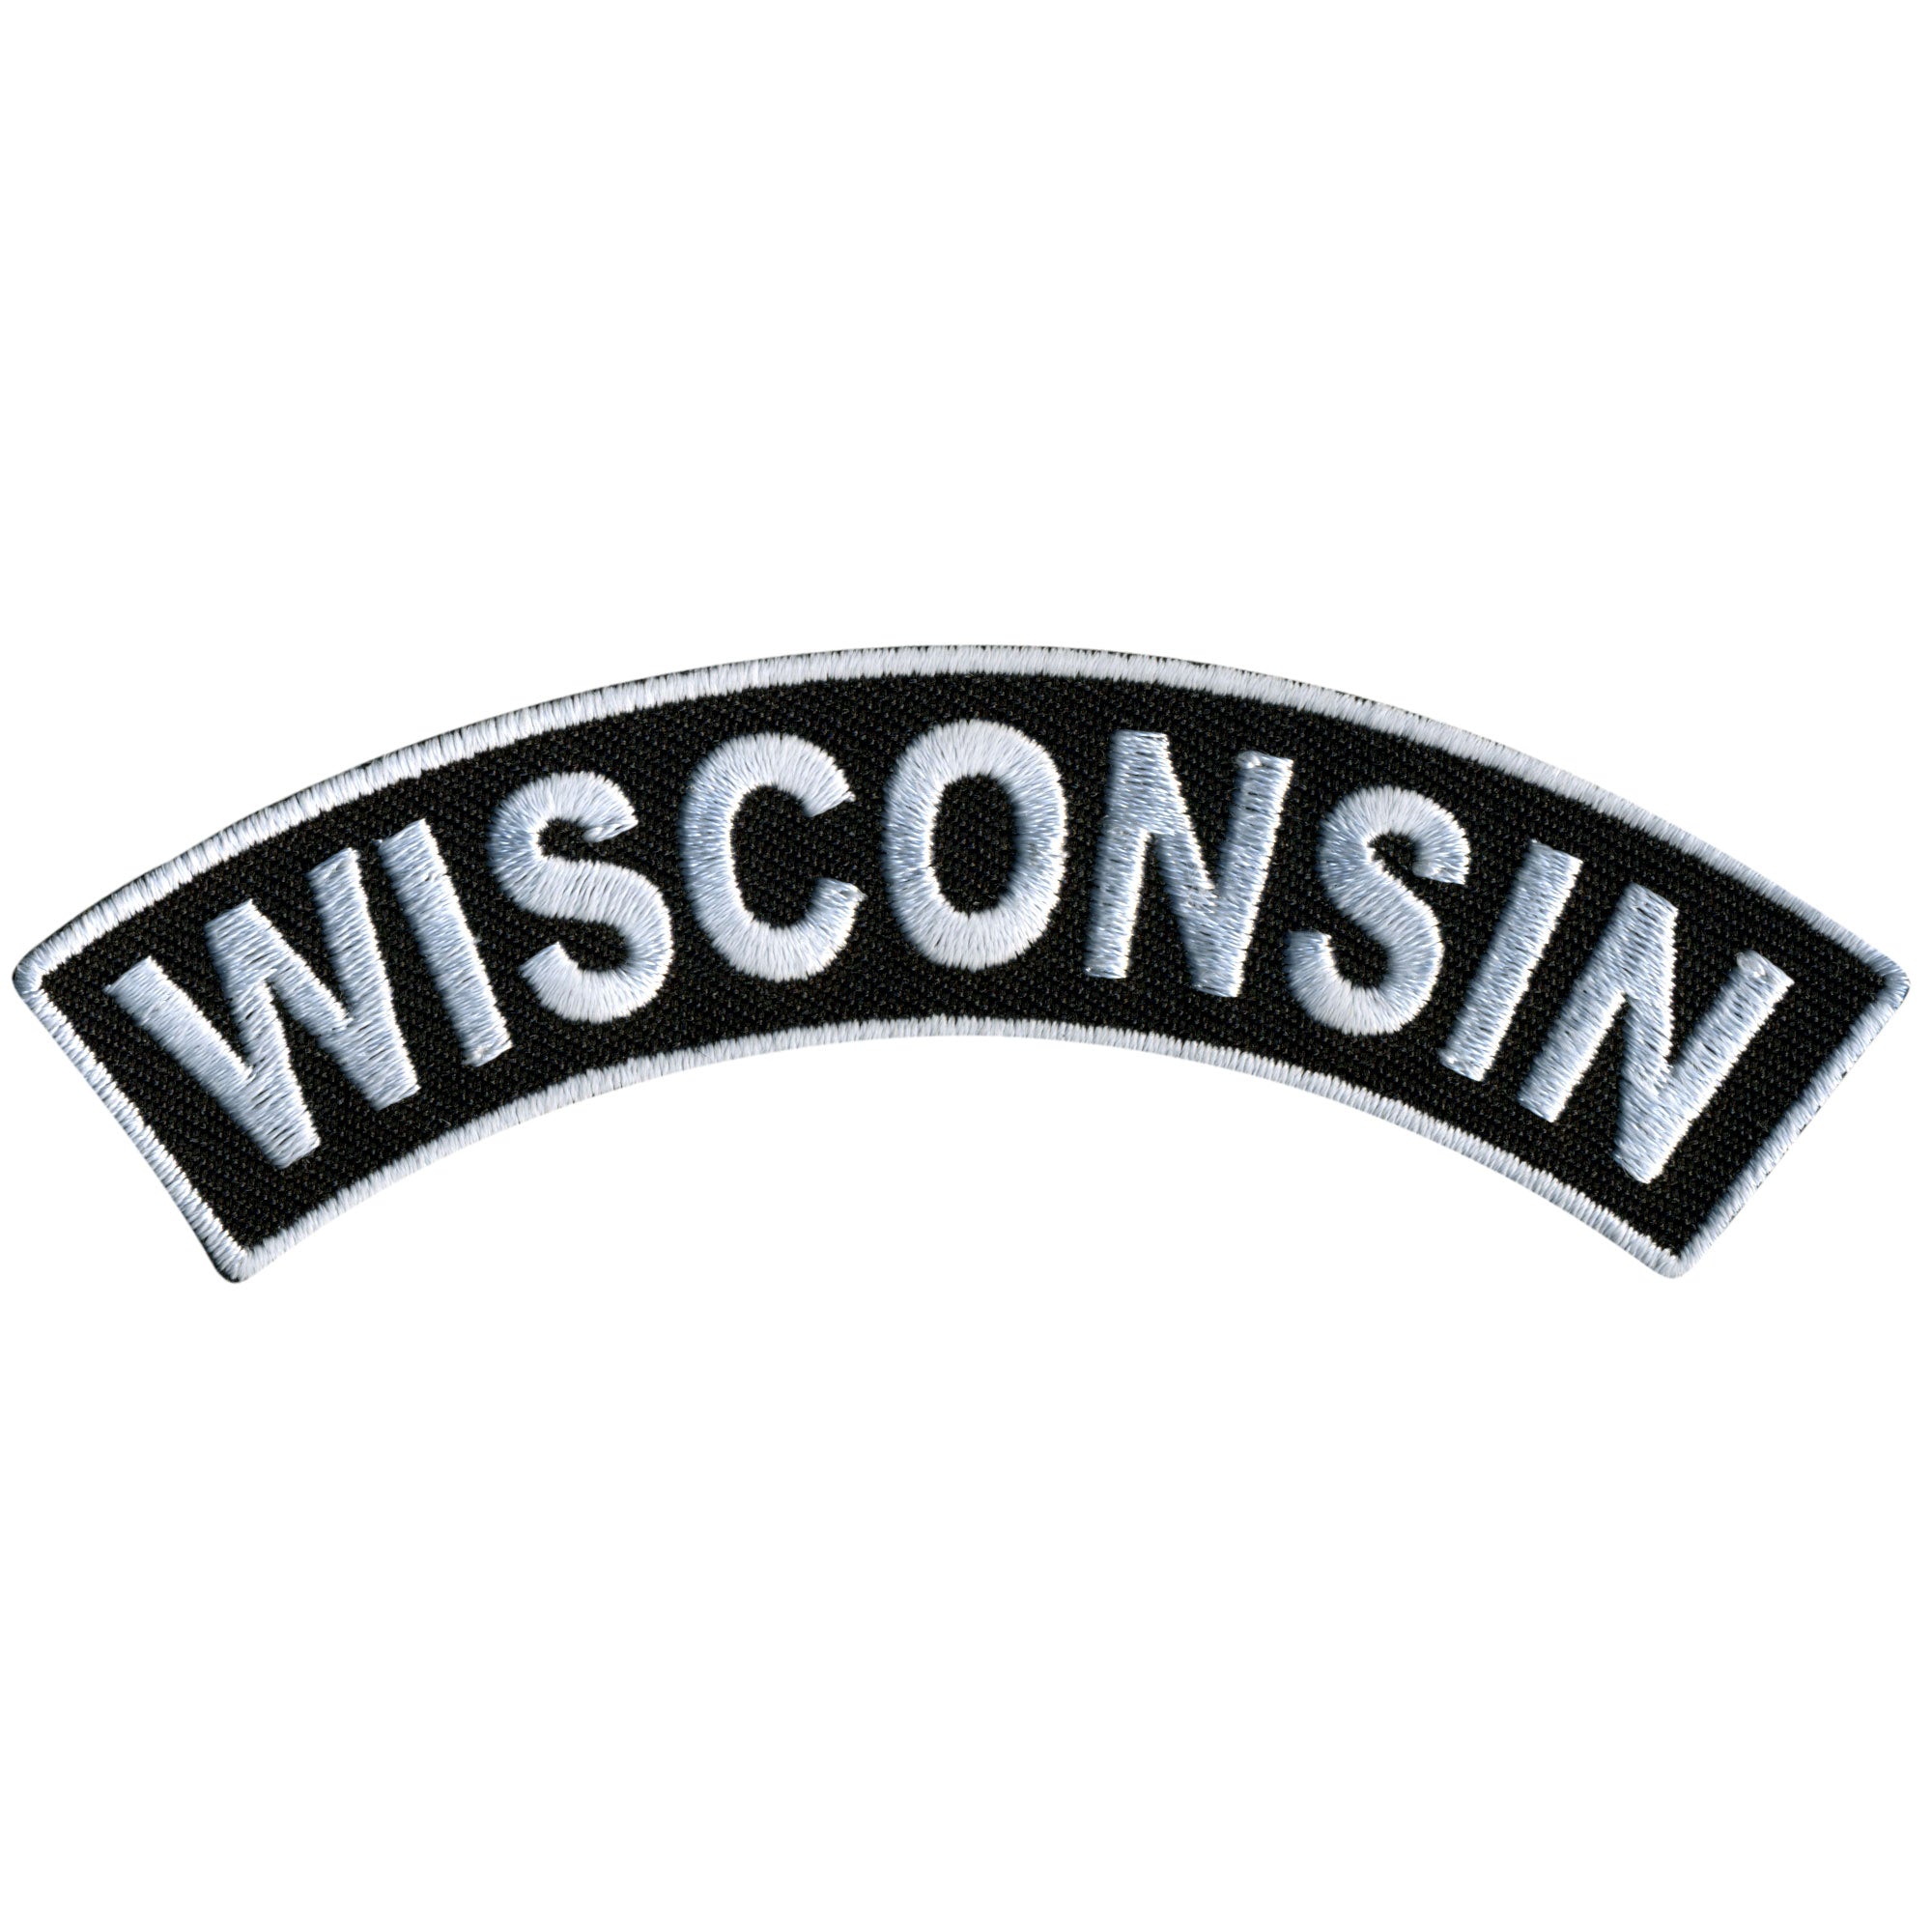 Hot Leathers Wisconsin 4” X 1” Top Rocker Patch